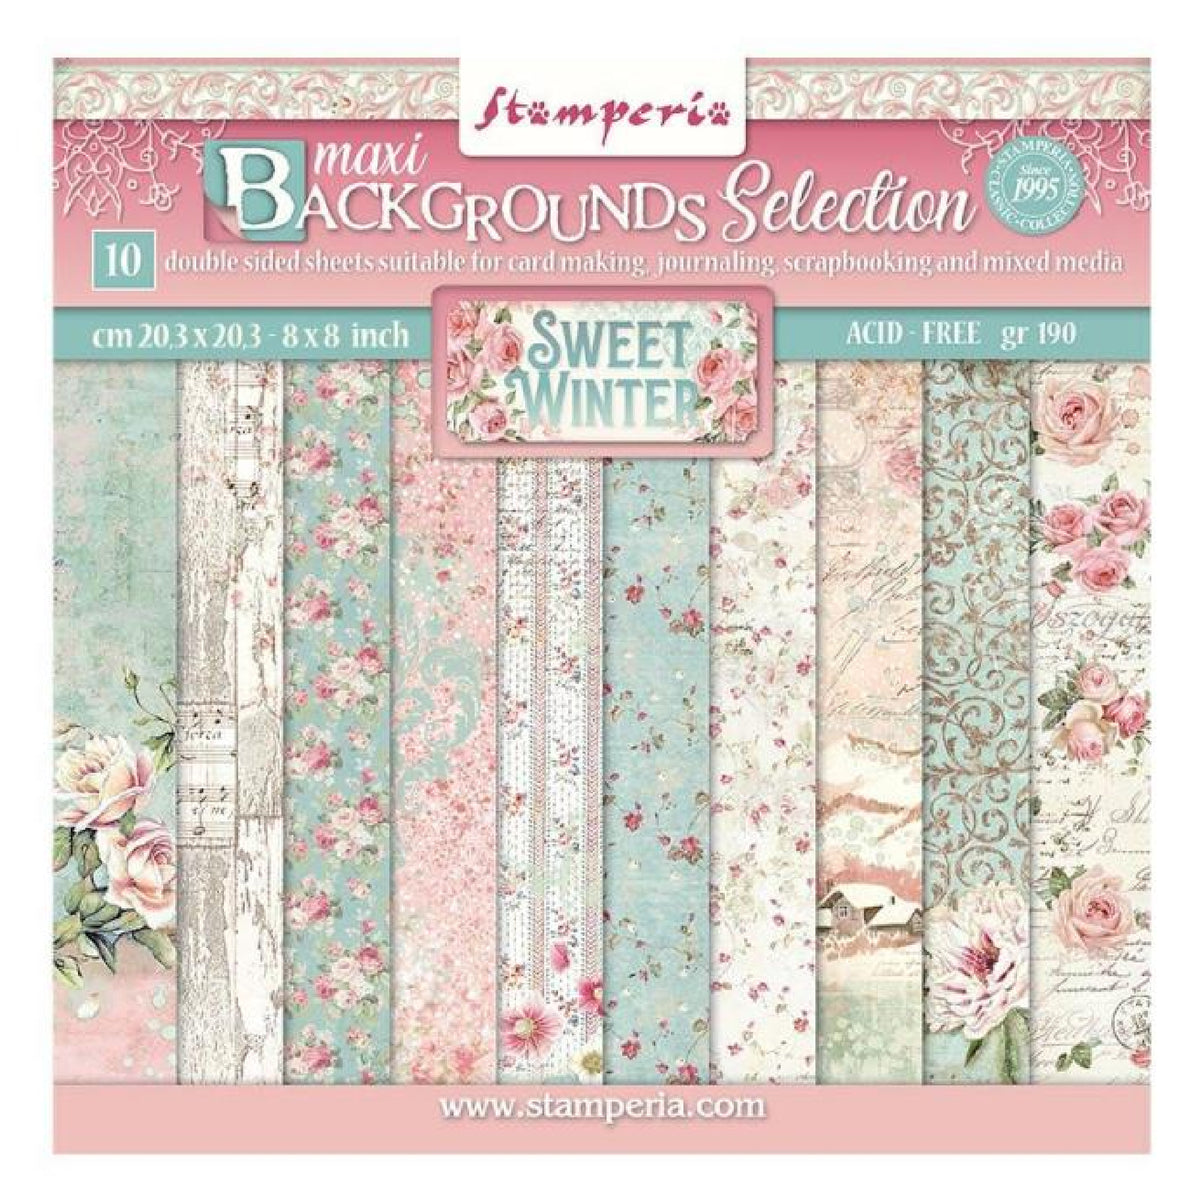 Stamperia, Scrapbooking Double Face Sheet - Winter Valley 6 Cards